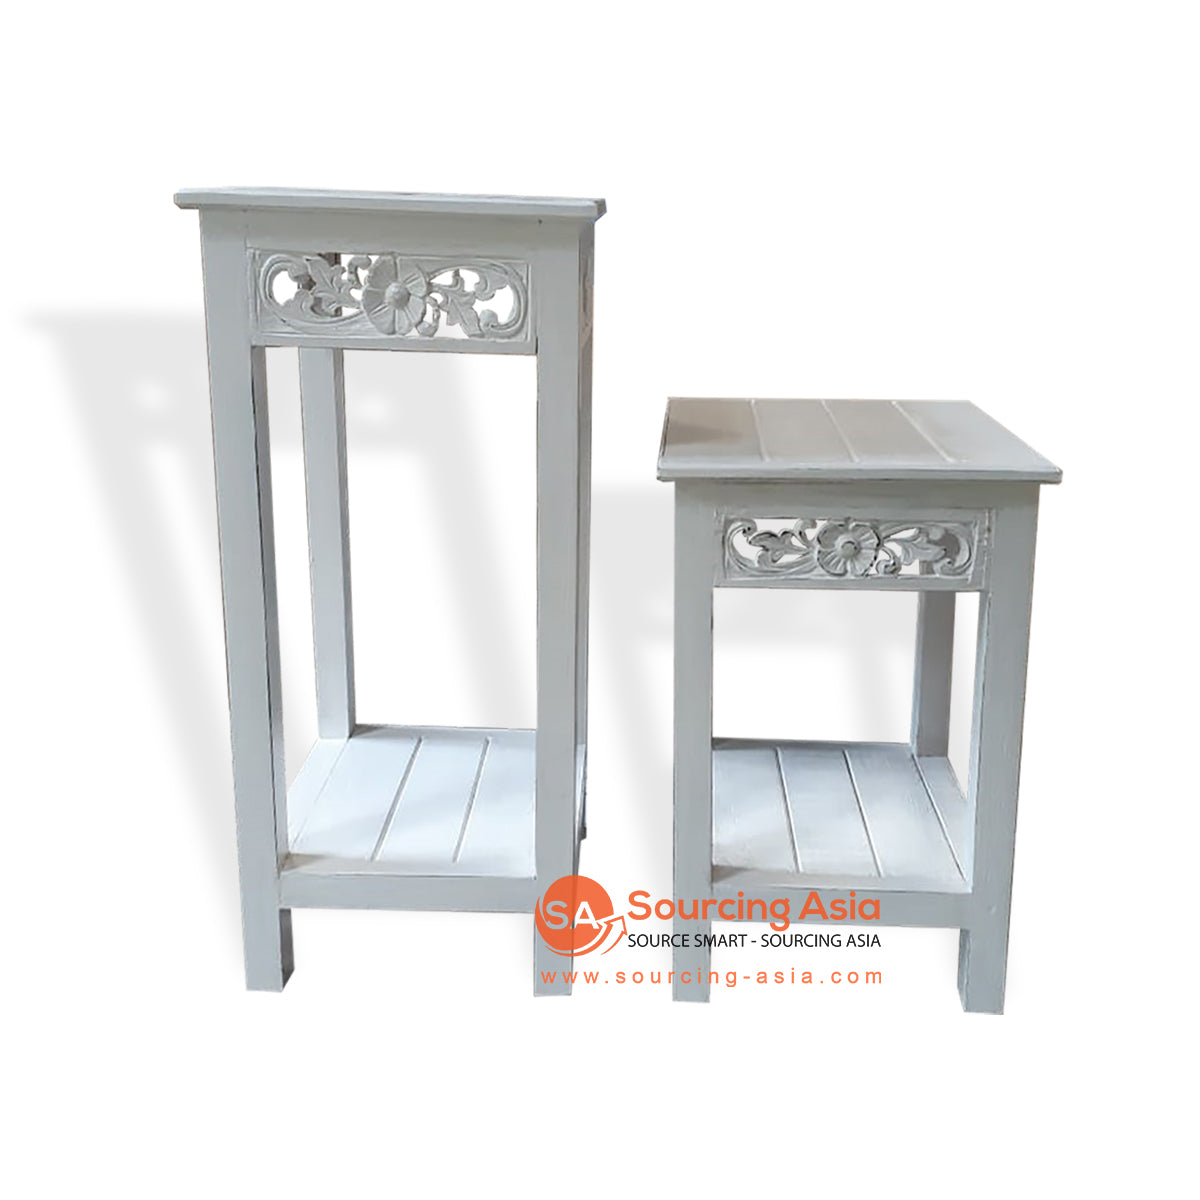 THE007-4 SET OF TWO WHITE WASH WOODEN CONSOLE TABLES